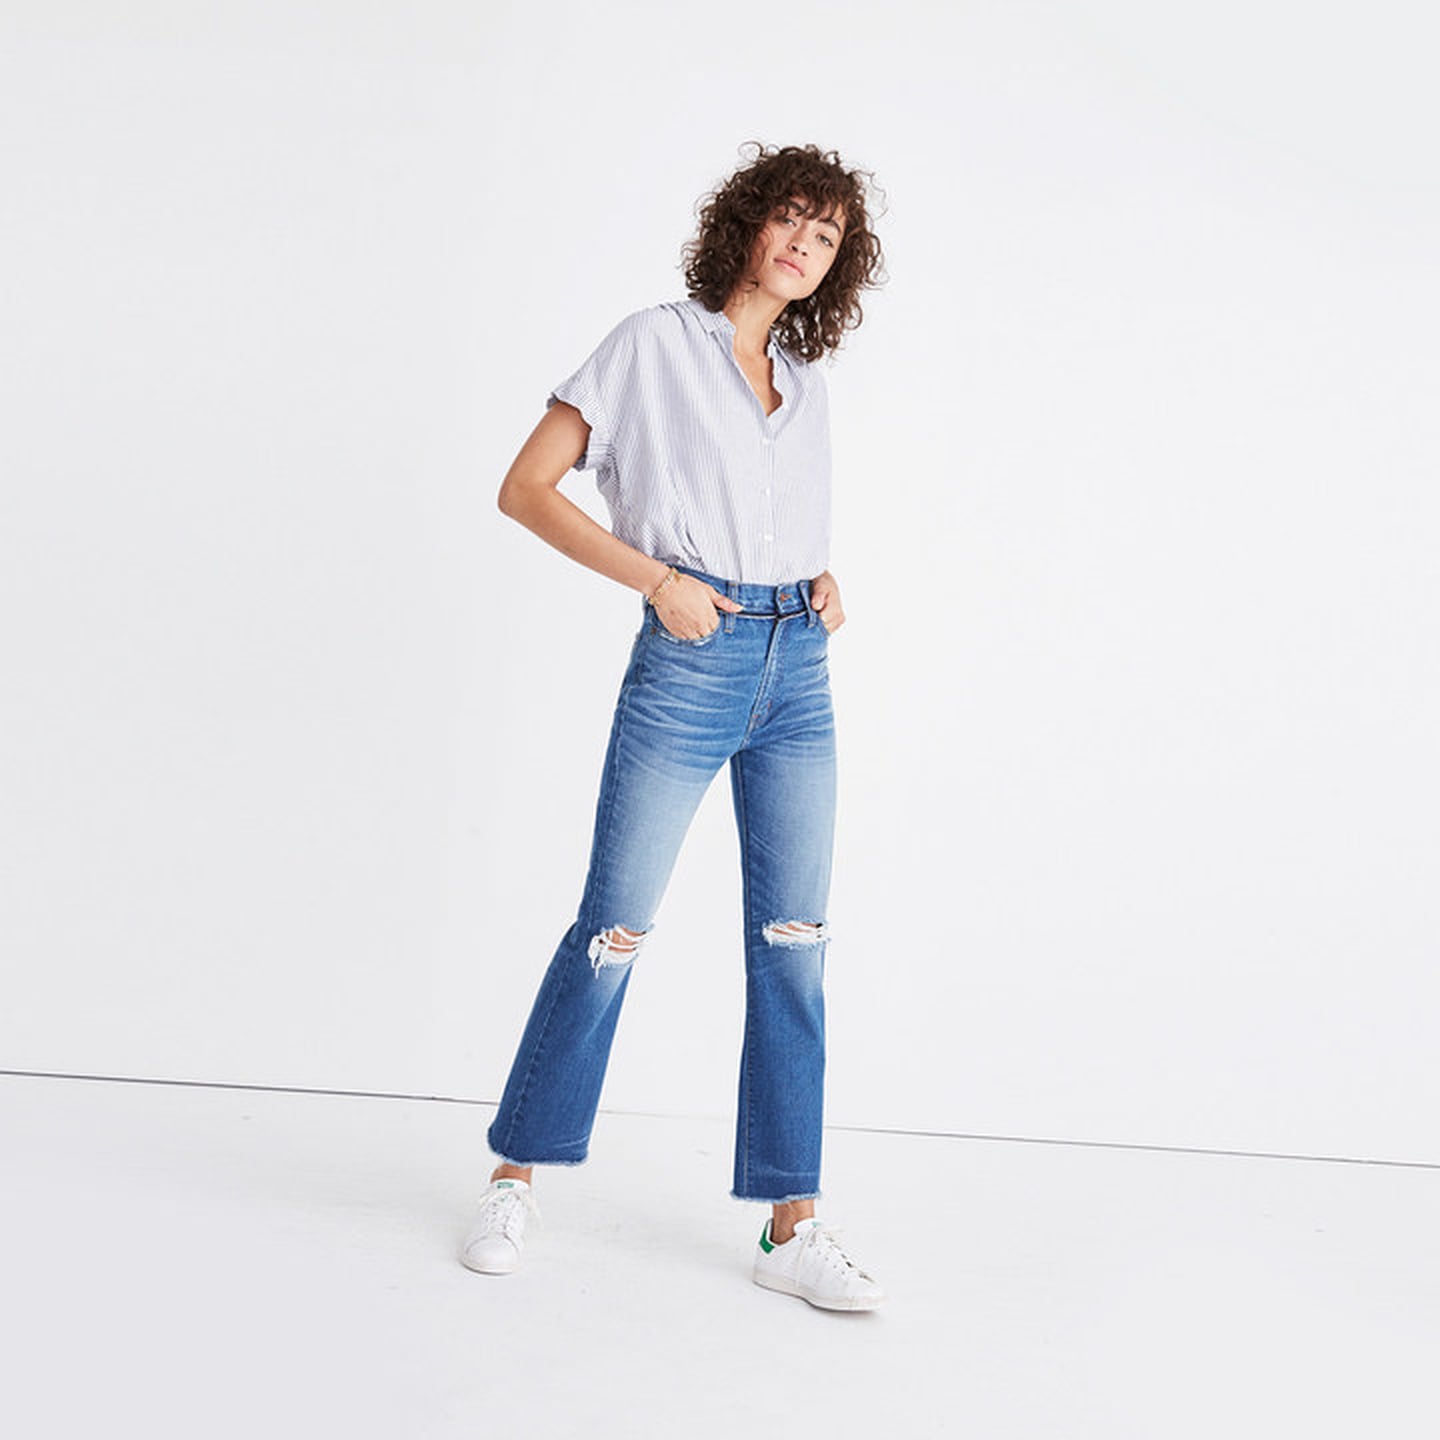 Fall Outfit Ideas From Madewell | POPSUGAR Fashion